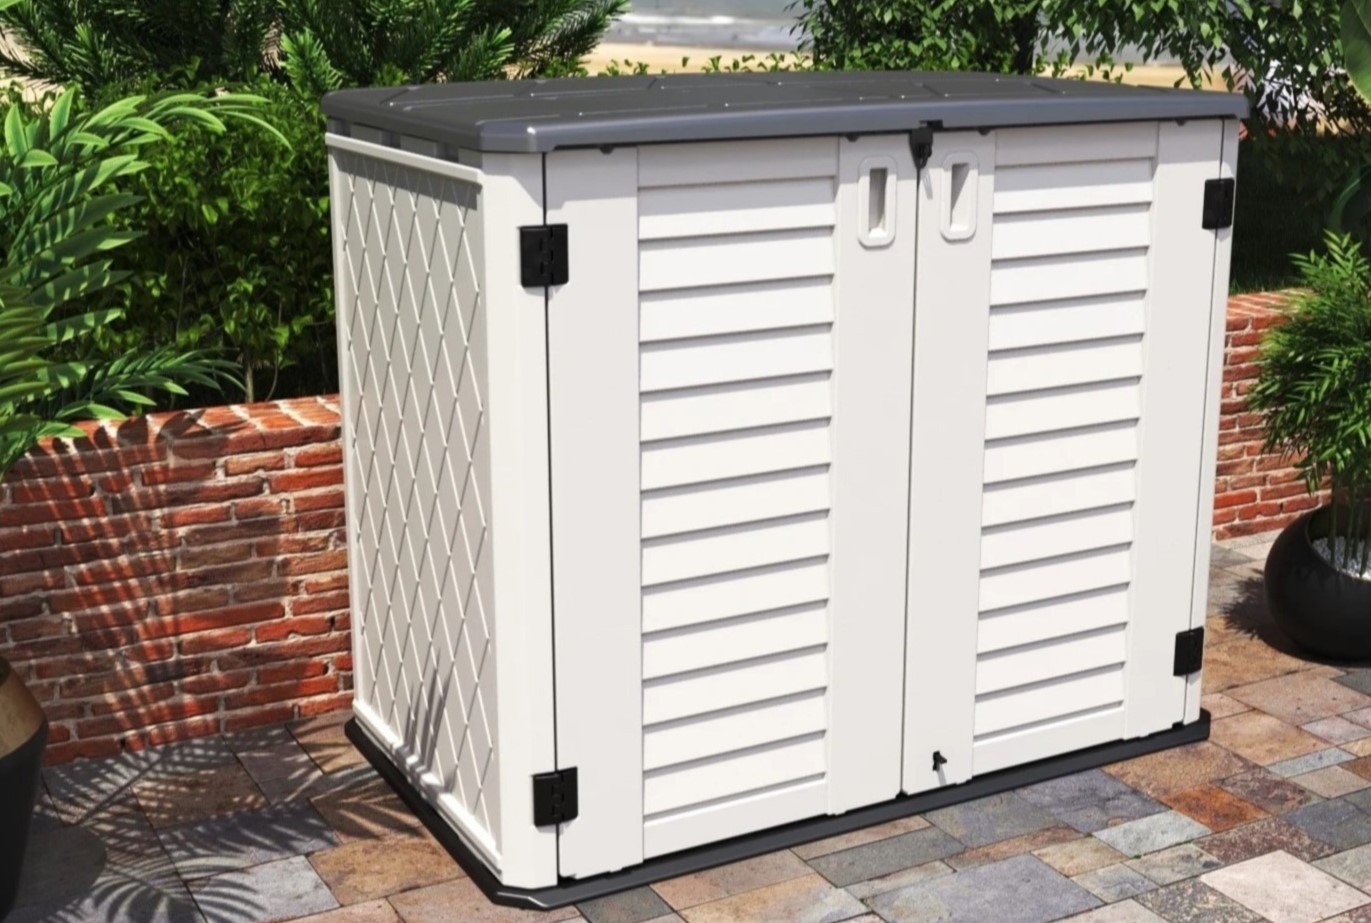 How To Make A Portable Generator Shed